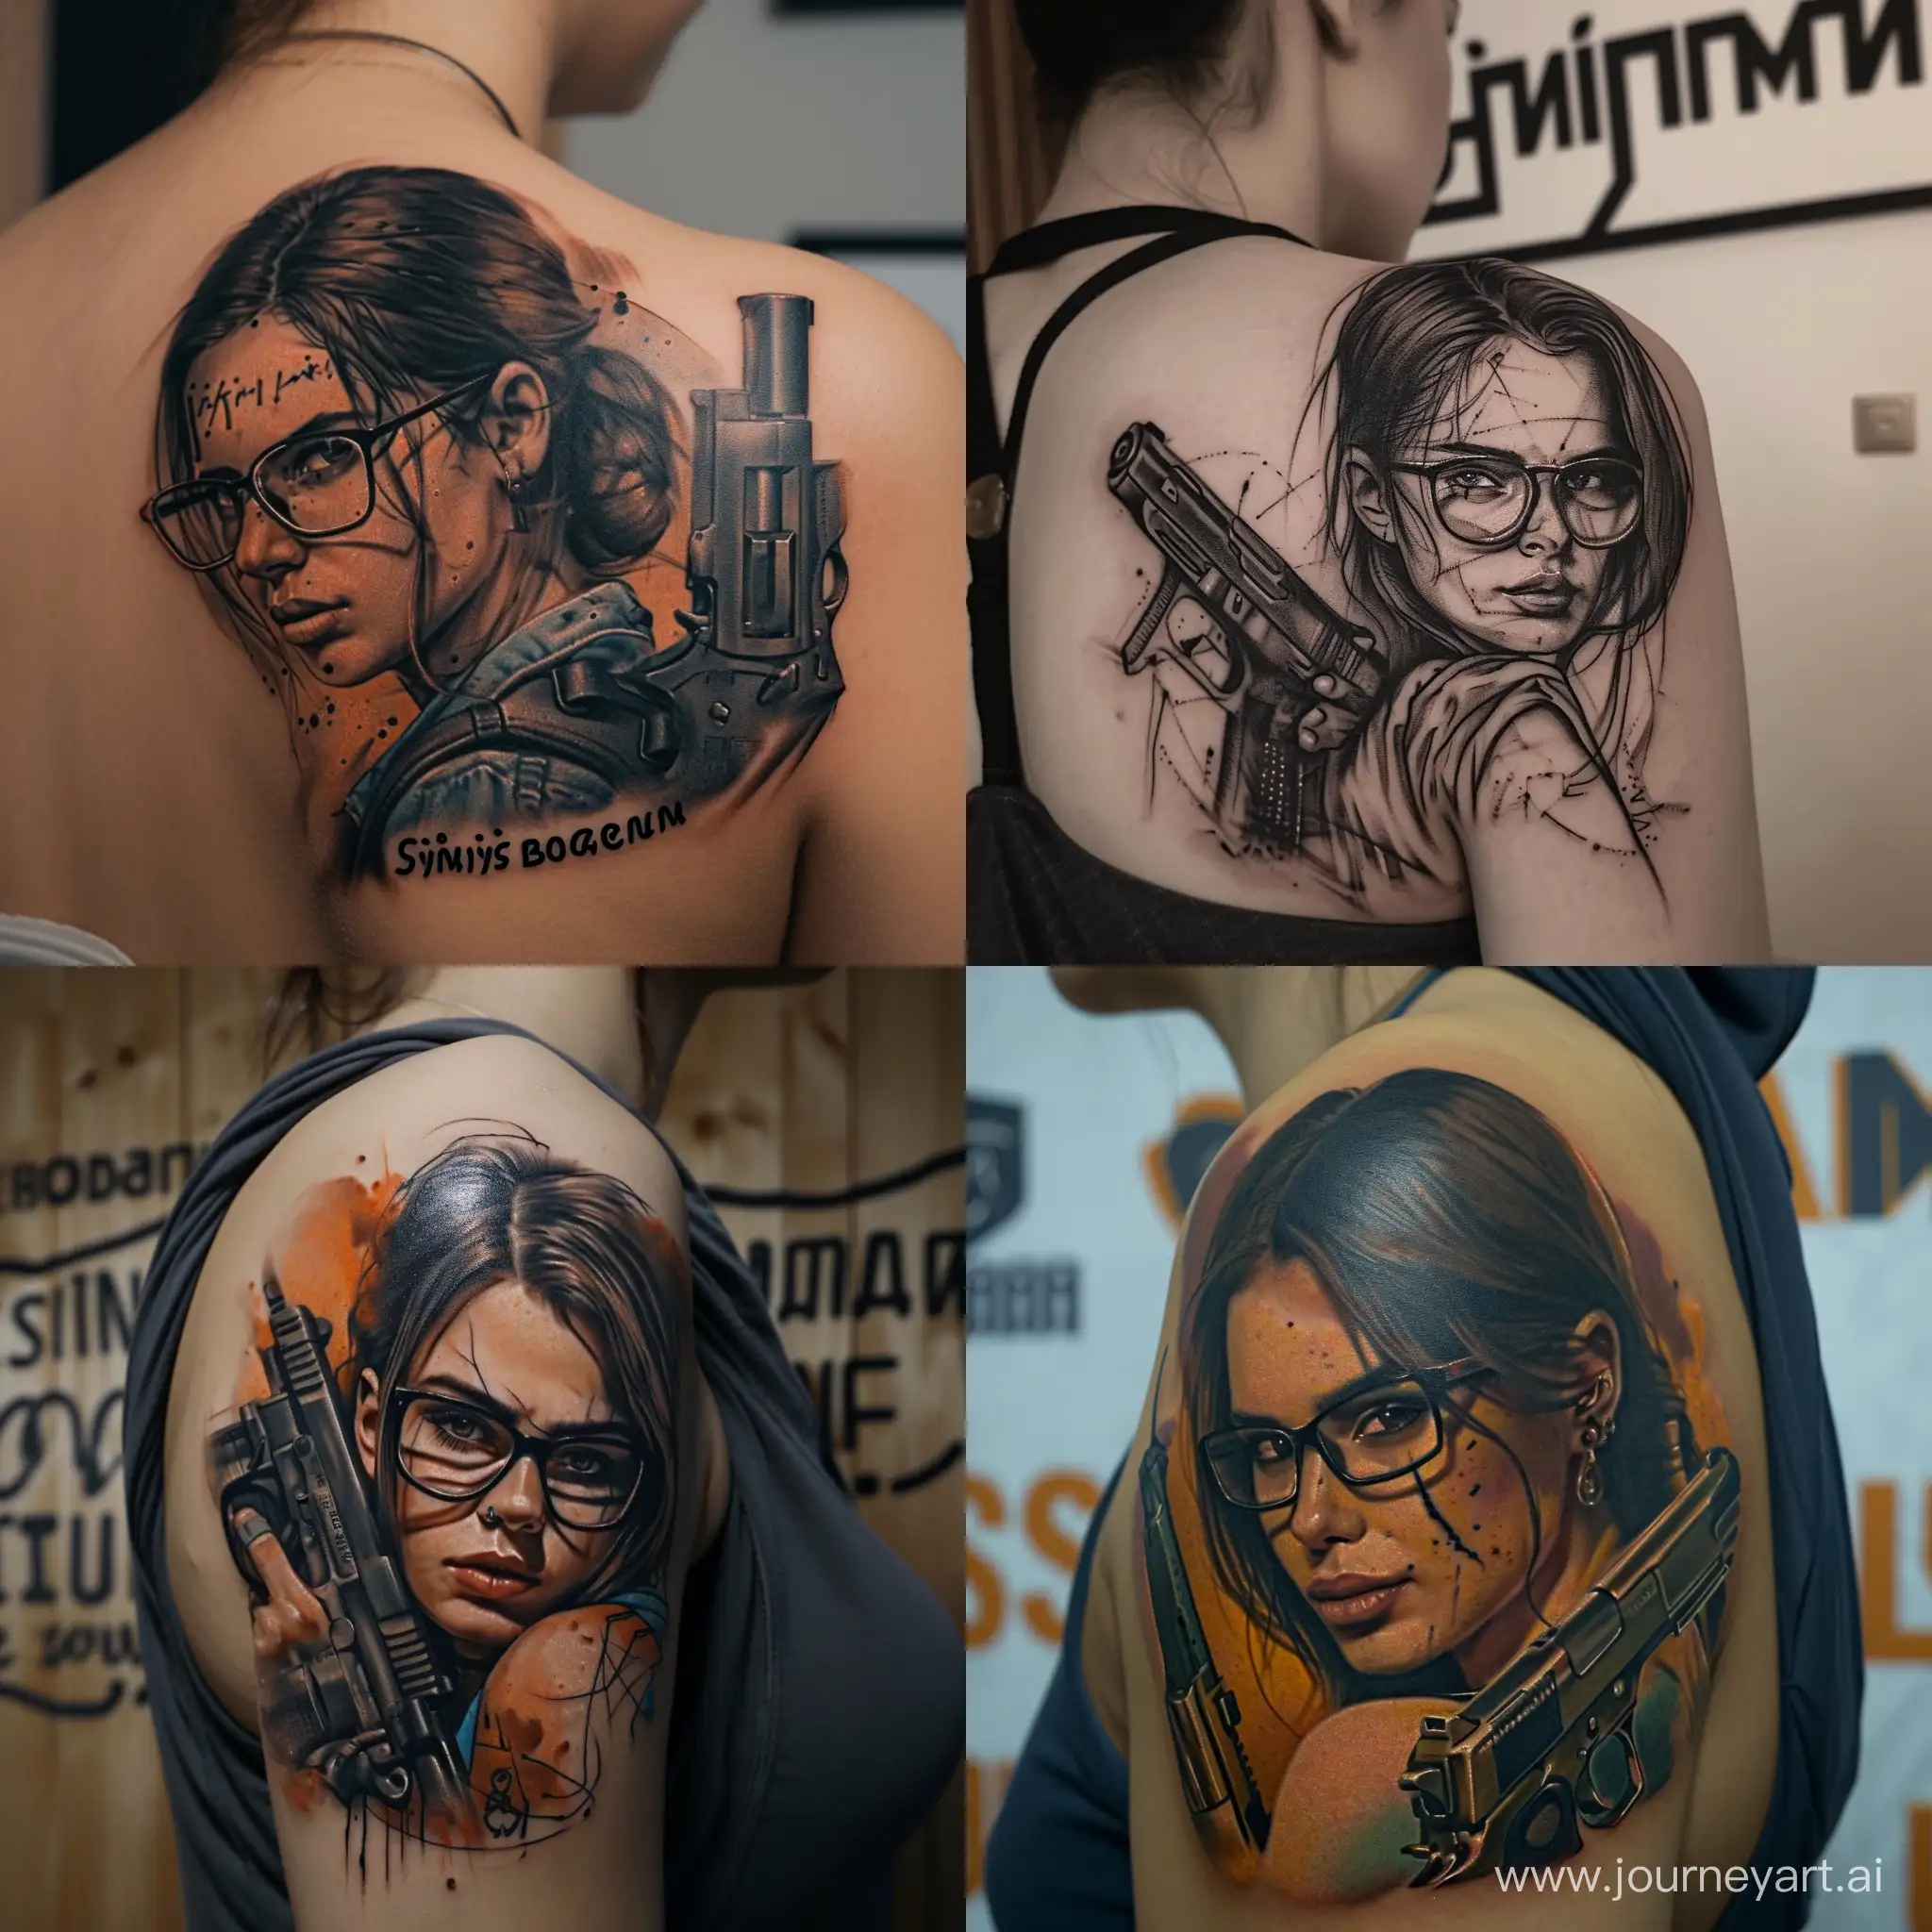 Tattoo of a girl with glasses and a pistol in the style of whipshaiding, on the shoulder, large detail, hyperrealism, daylight, siniybocman is written on the wall in the background